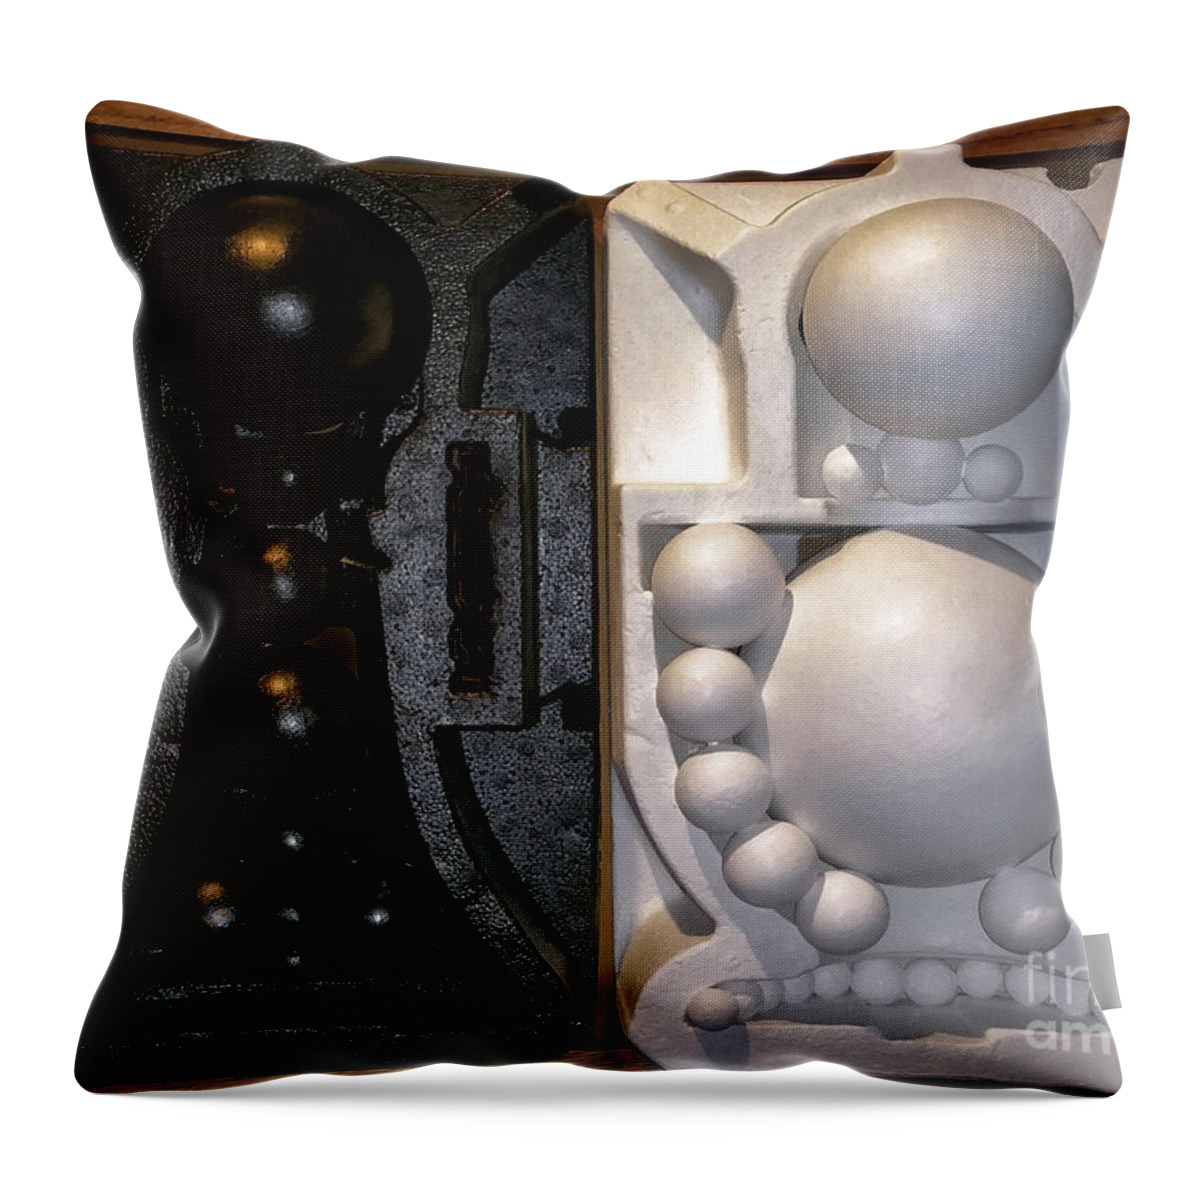  Throw Pillow featuring the painting Willendorf Wedding #2 by James Lanigan Thompson MFA